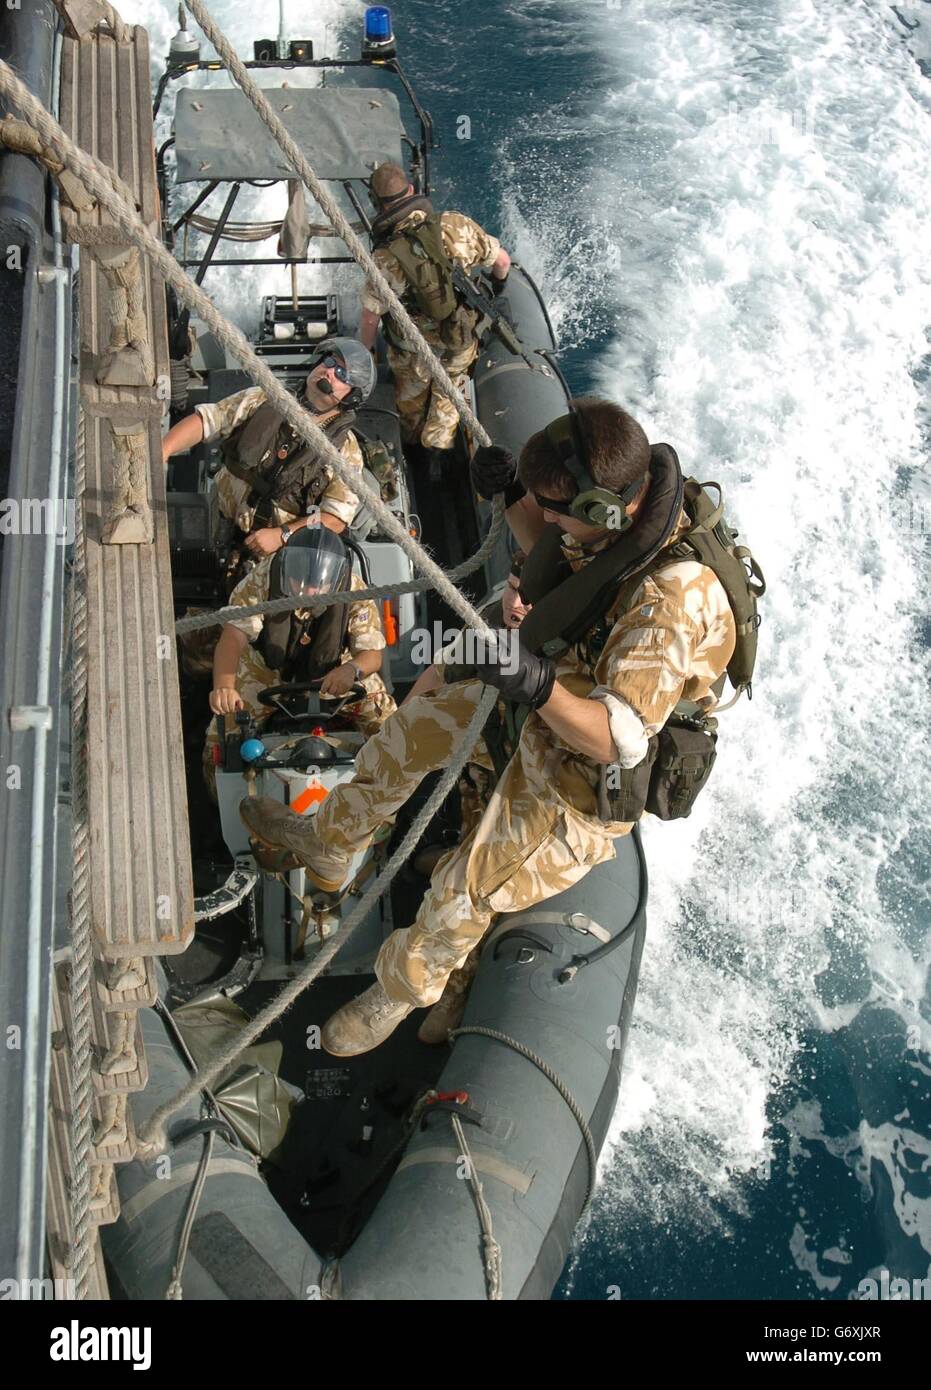 2nd Lt Doug Pennefather, 26, of the Royal Marines slides into a launch attached to HMS Grafton, A Type 23 Frigate currently patrolling the waters off the coast of Iraq. Terrorist activities off the coast of Iraq will not be curbed unless the coalition co-operates more closely with Iran, according to the captain of the British warship patrolling the region. Commander Adrian Cassar said the occupying forces had been making good progress regulating shipping in Iraqi territory, but had little information concerning movements in neighbouring Iranian waters. Stock Photo